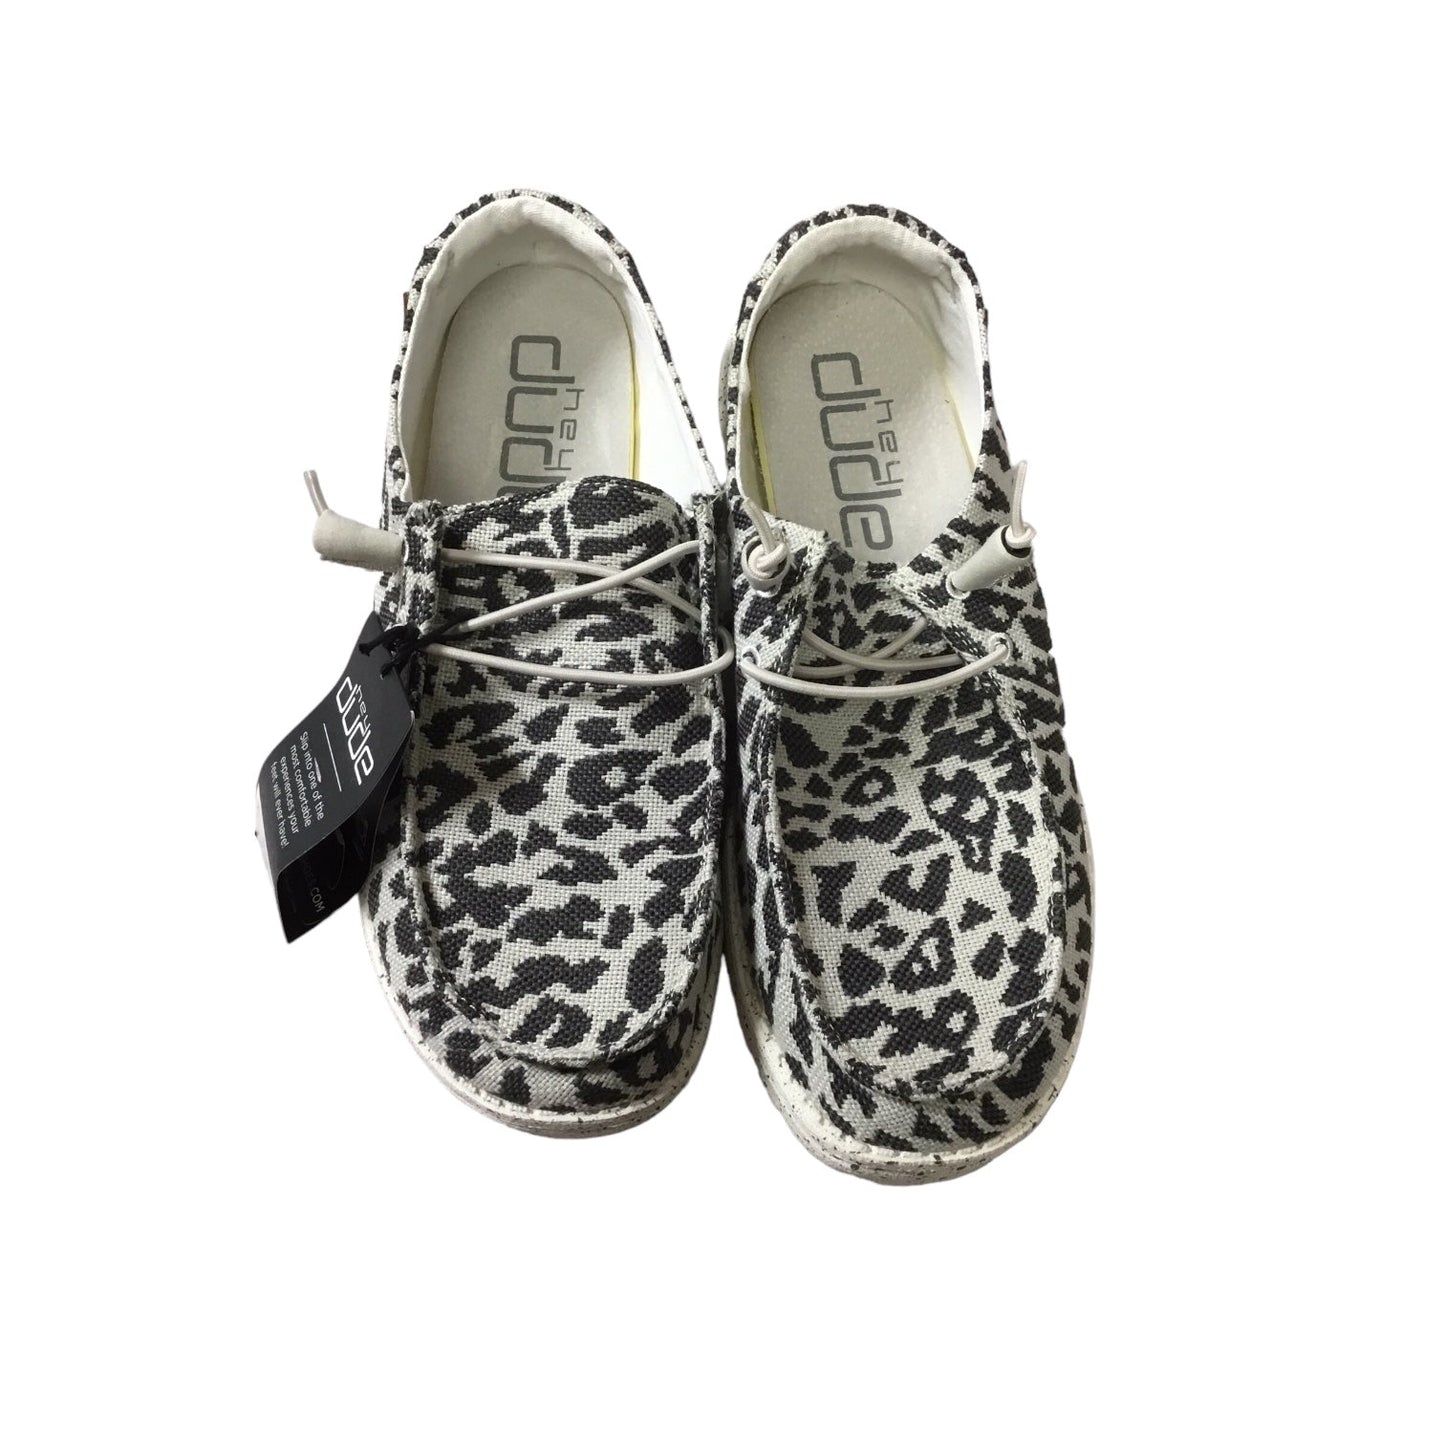 Animal Print Shoes Flats Hey Dude, Size 9